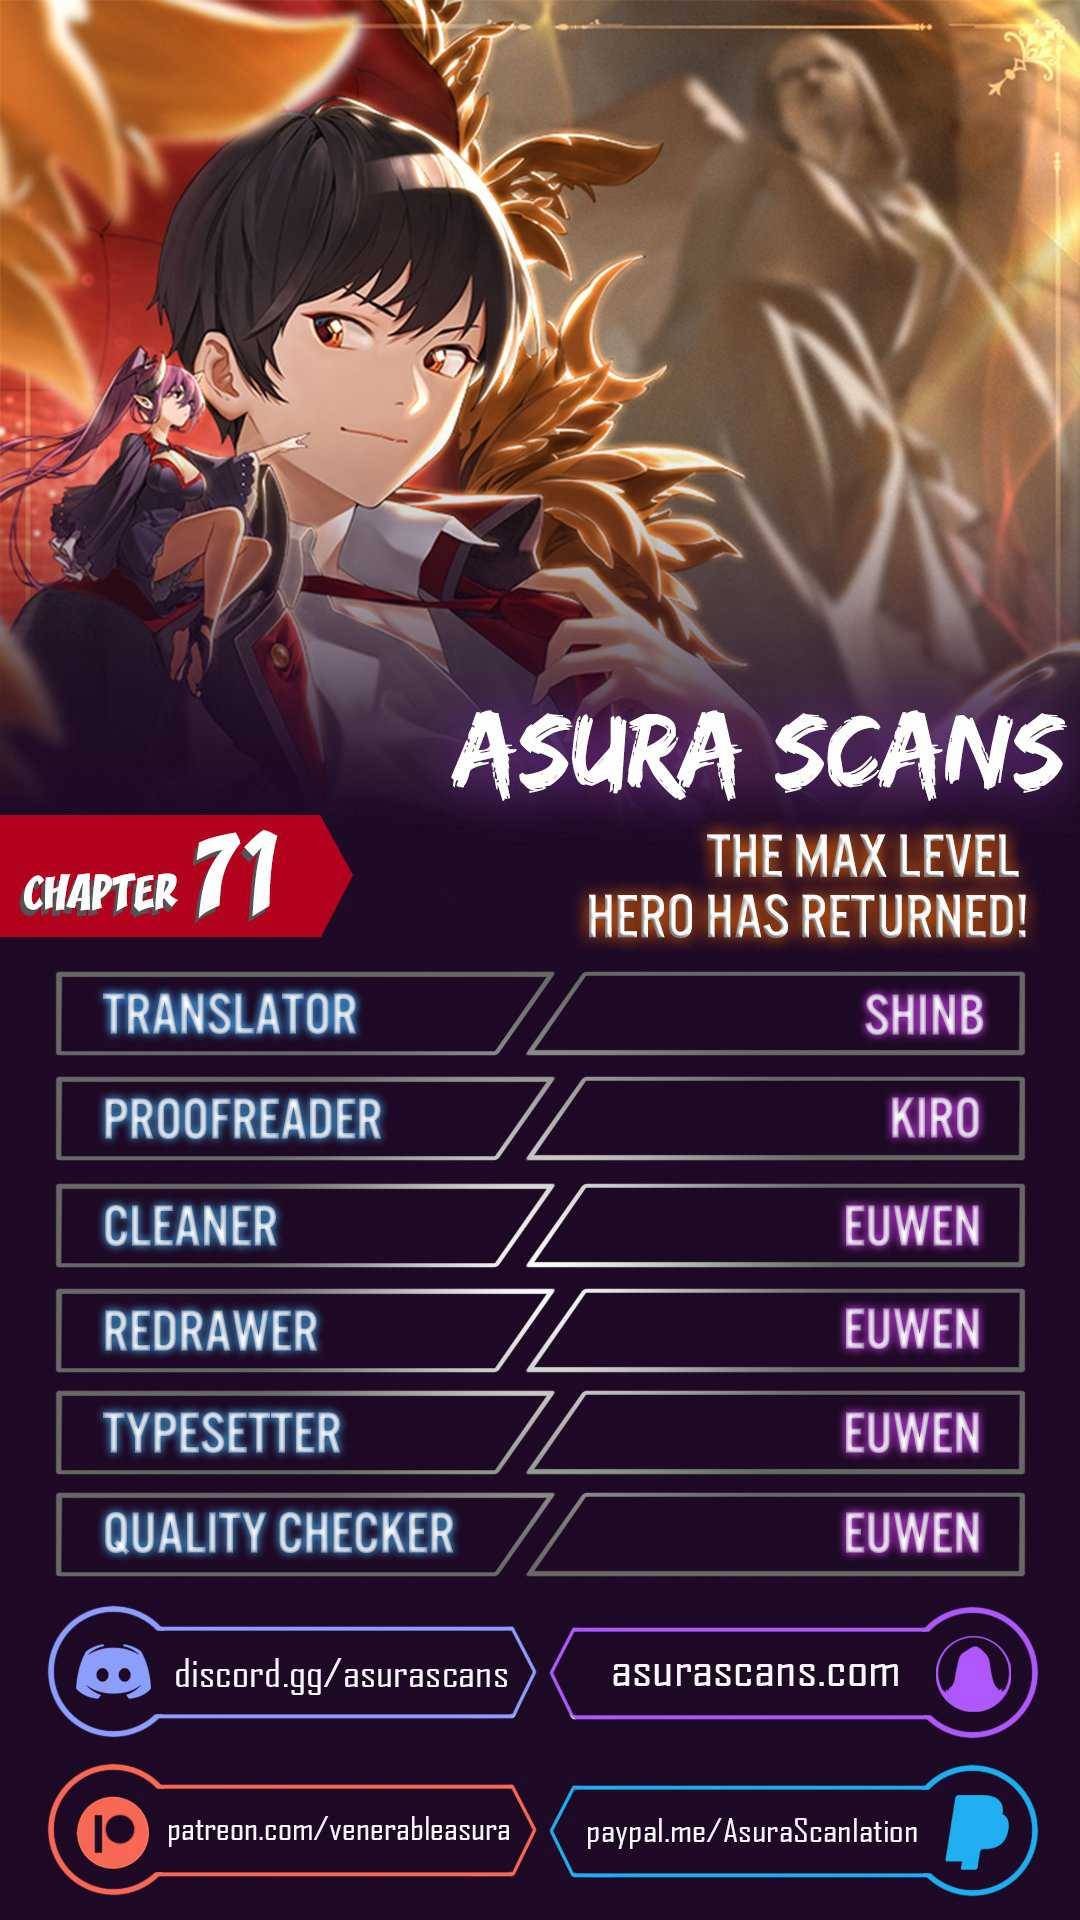 The MAX leveled hero will return! Chapter 71